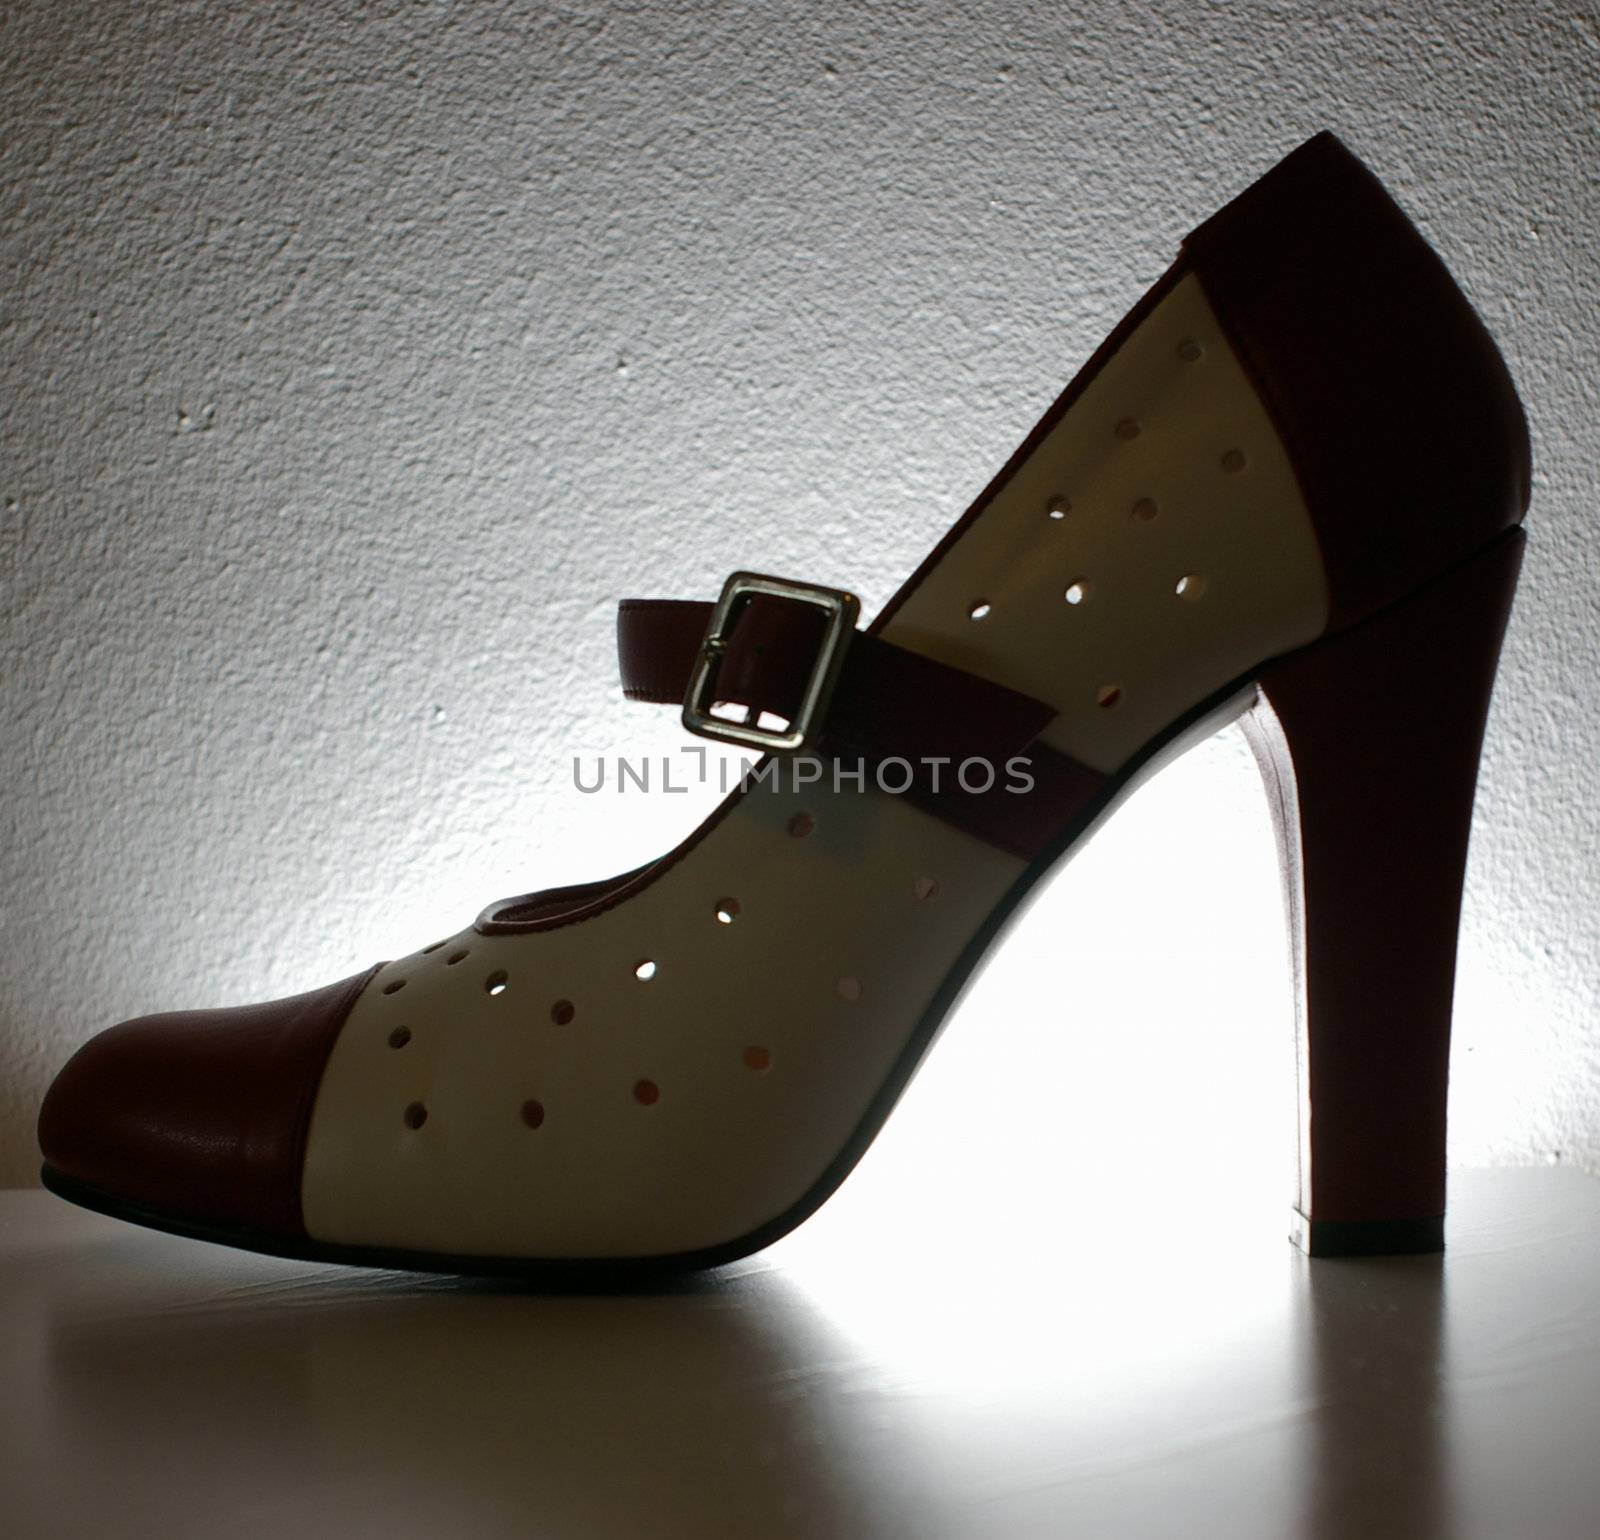 A backlite red and white ladies high heel shoe.